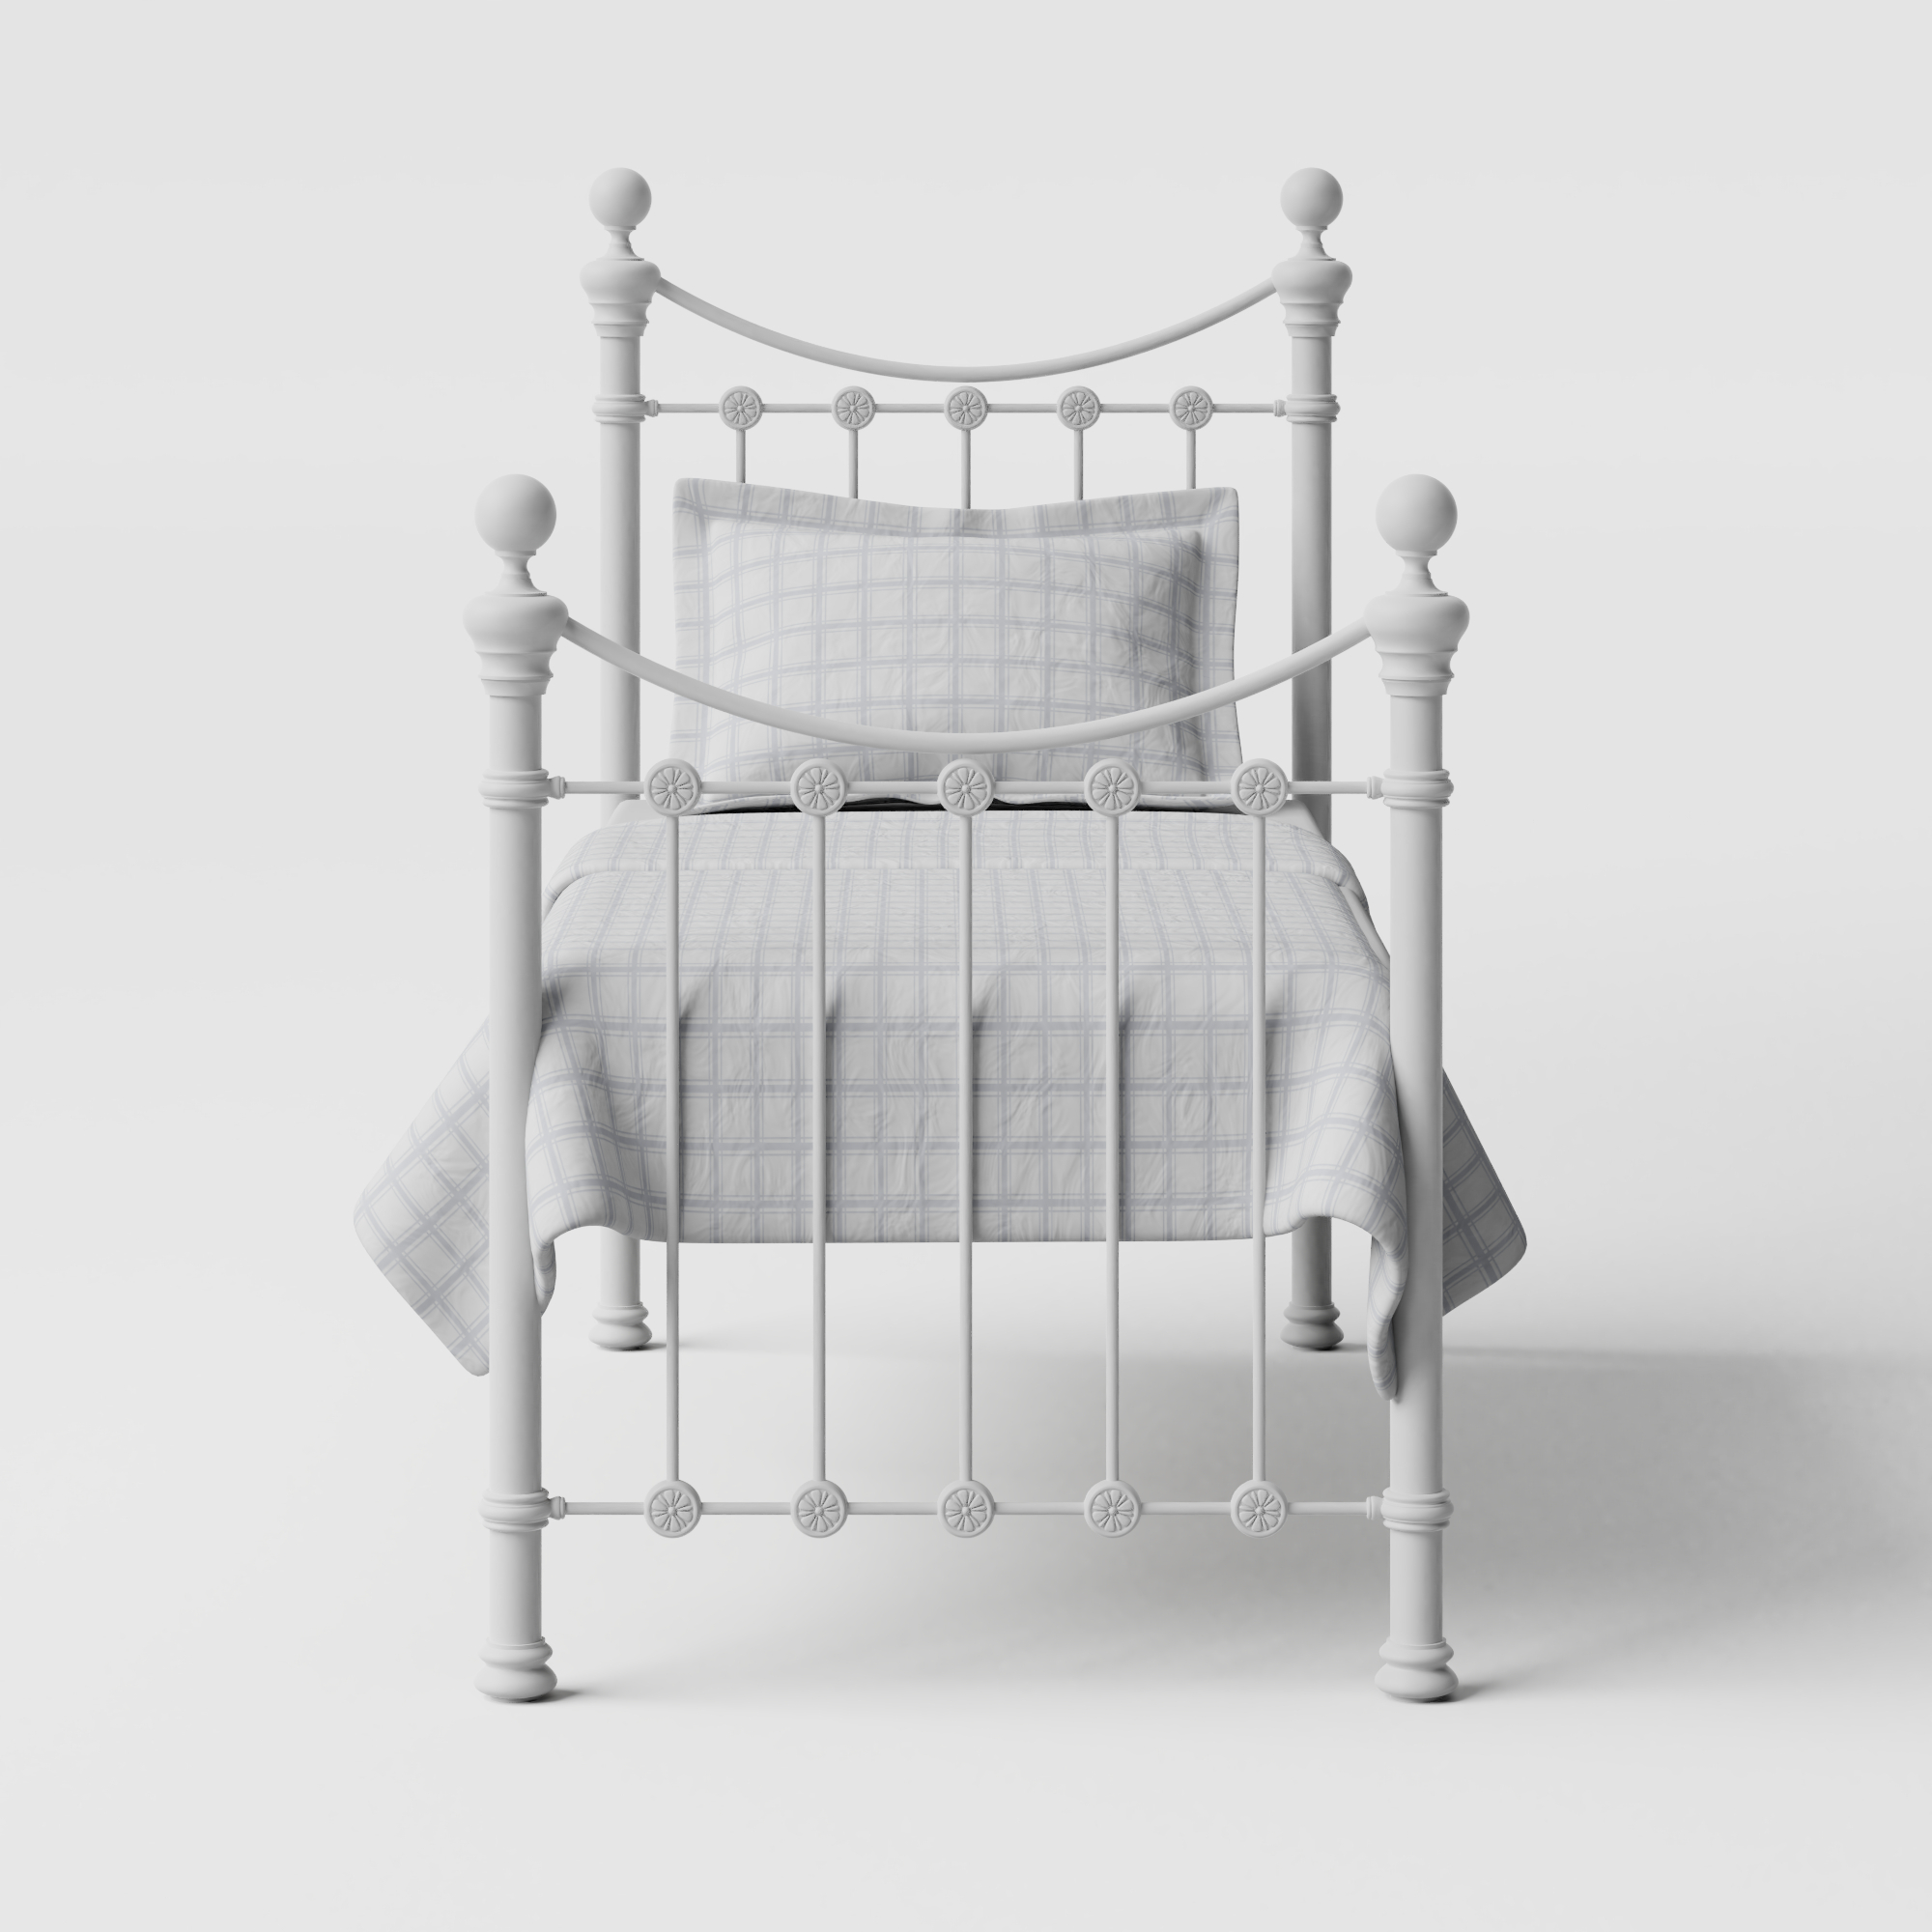 Selkirk Solo iron/metal single bed in white